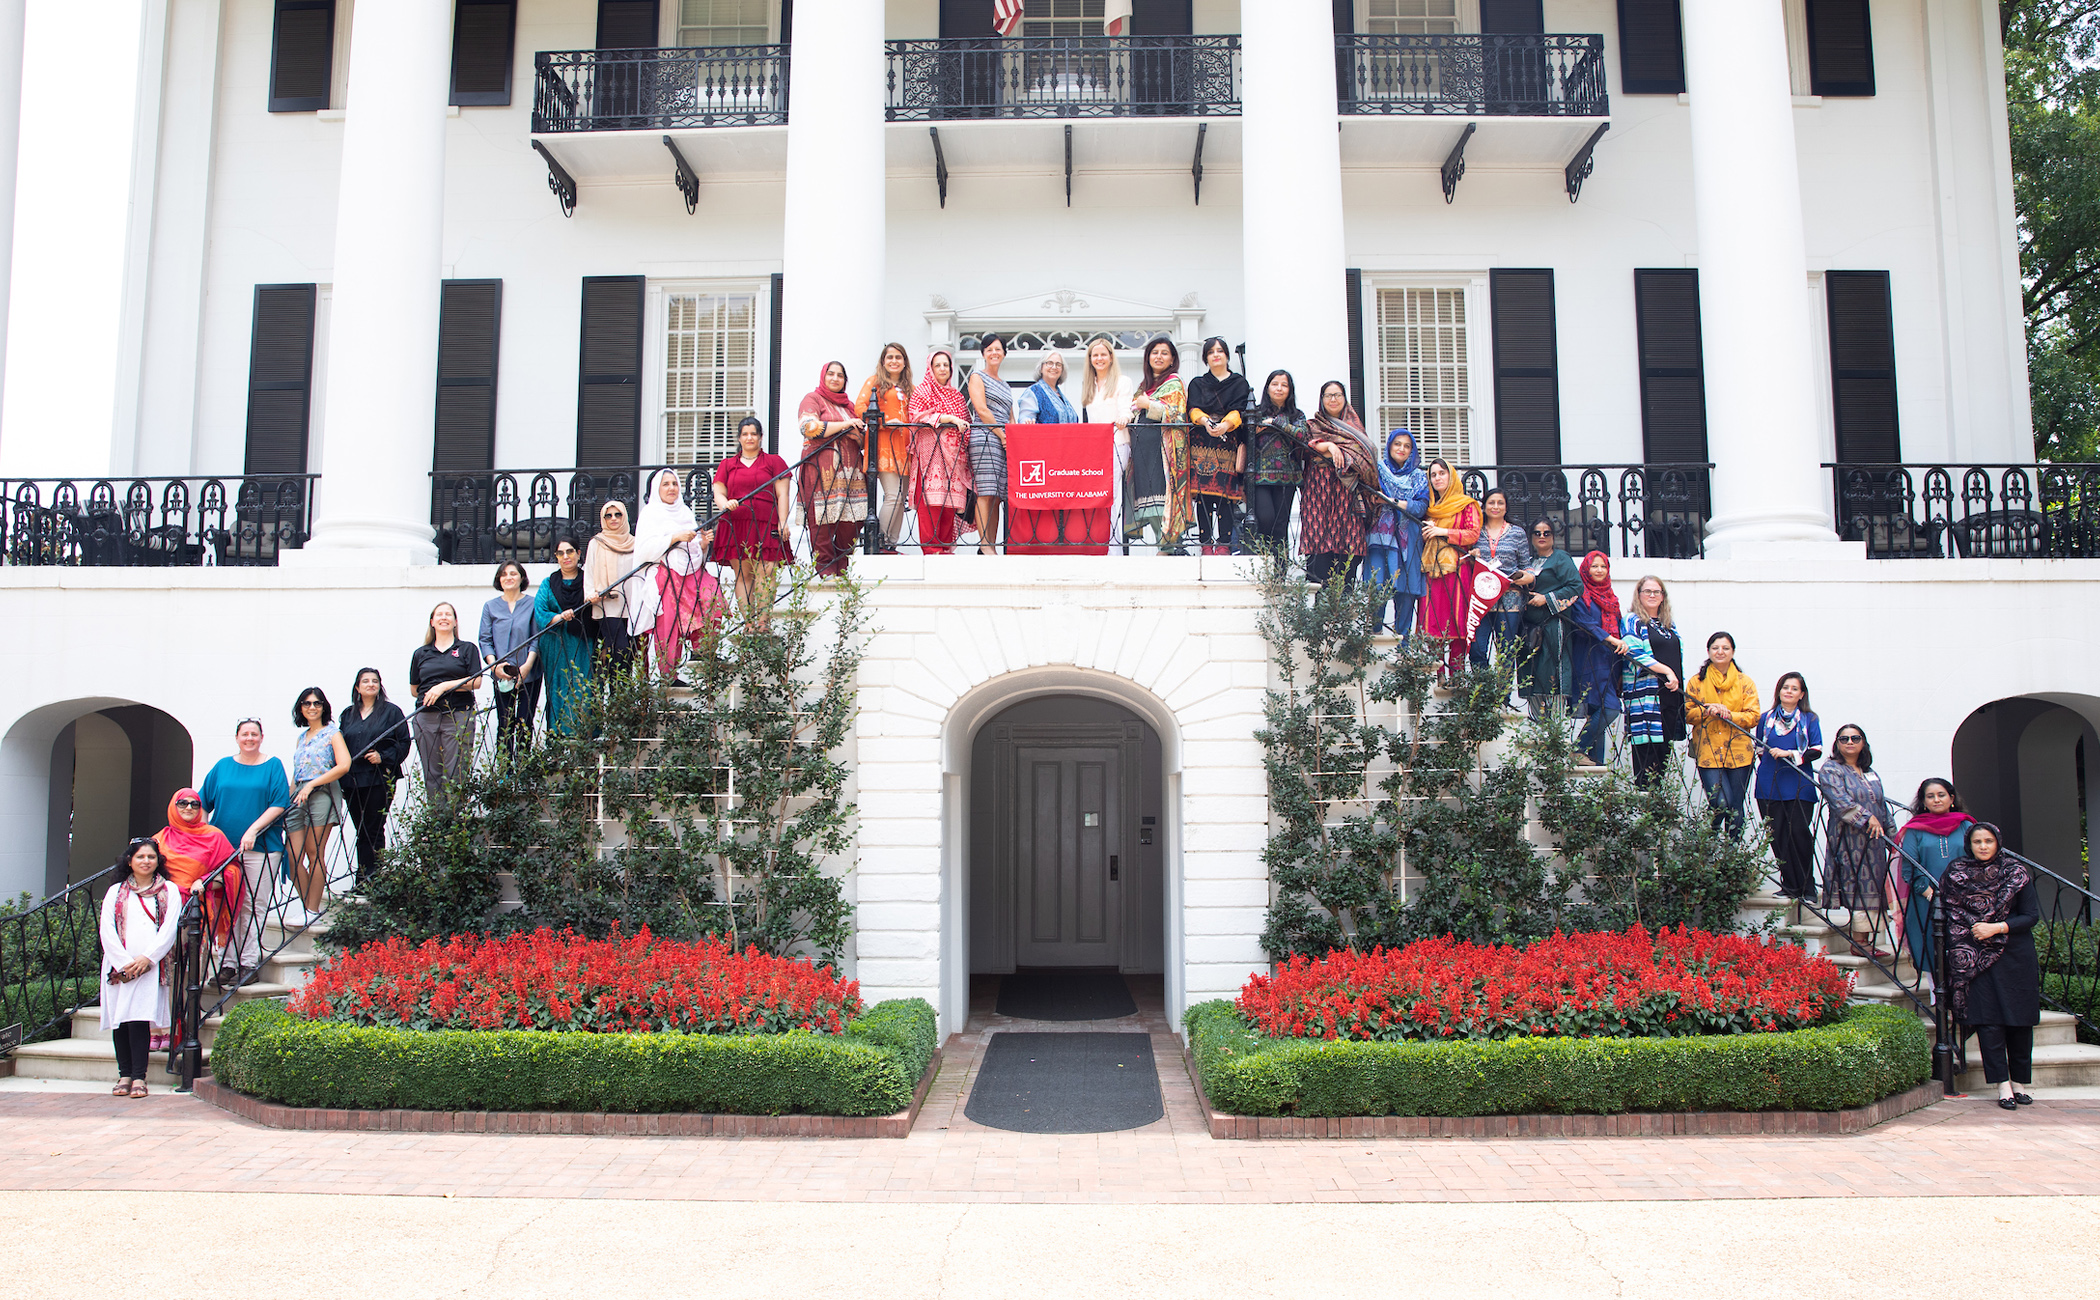 The exchange program participants on the steps of the President's Mansion